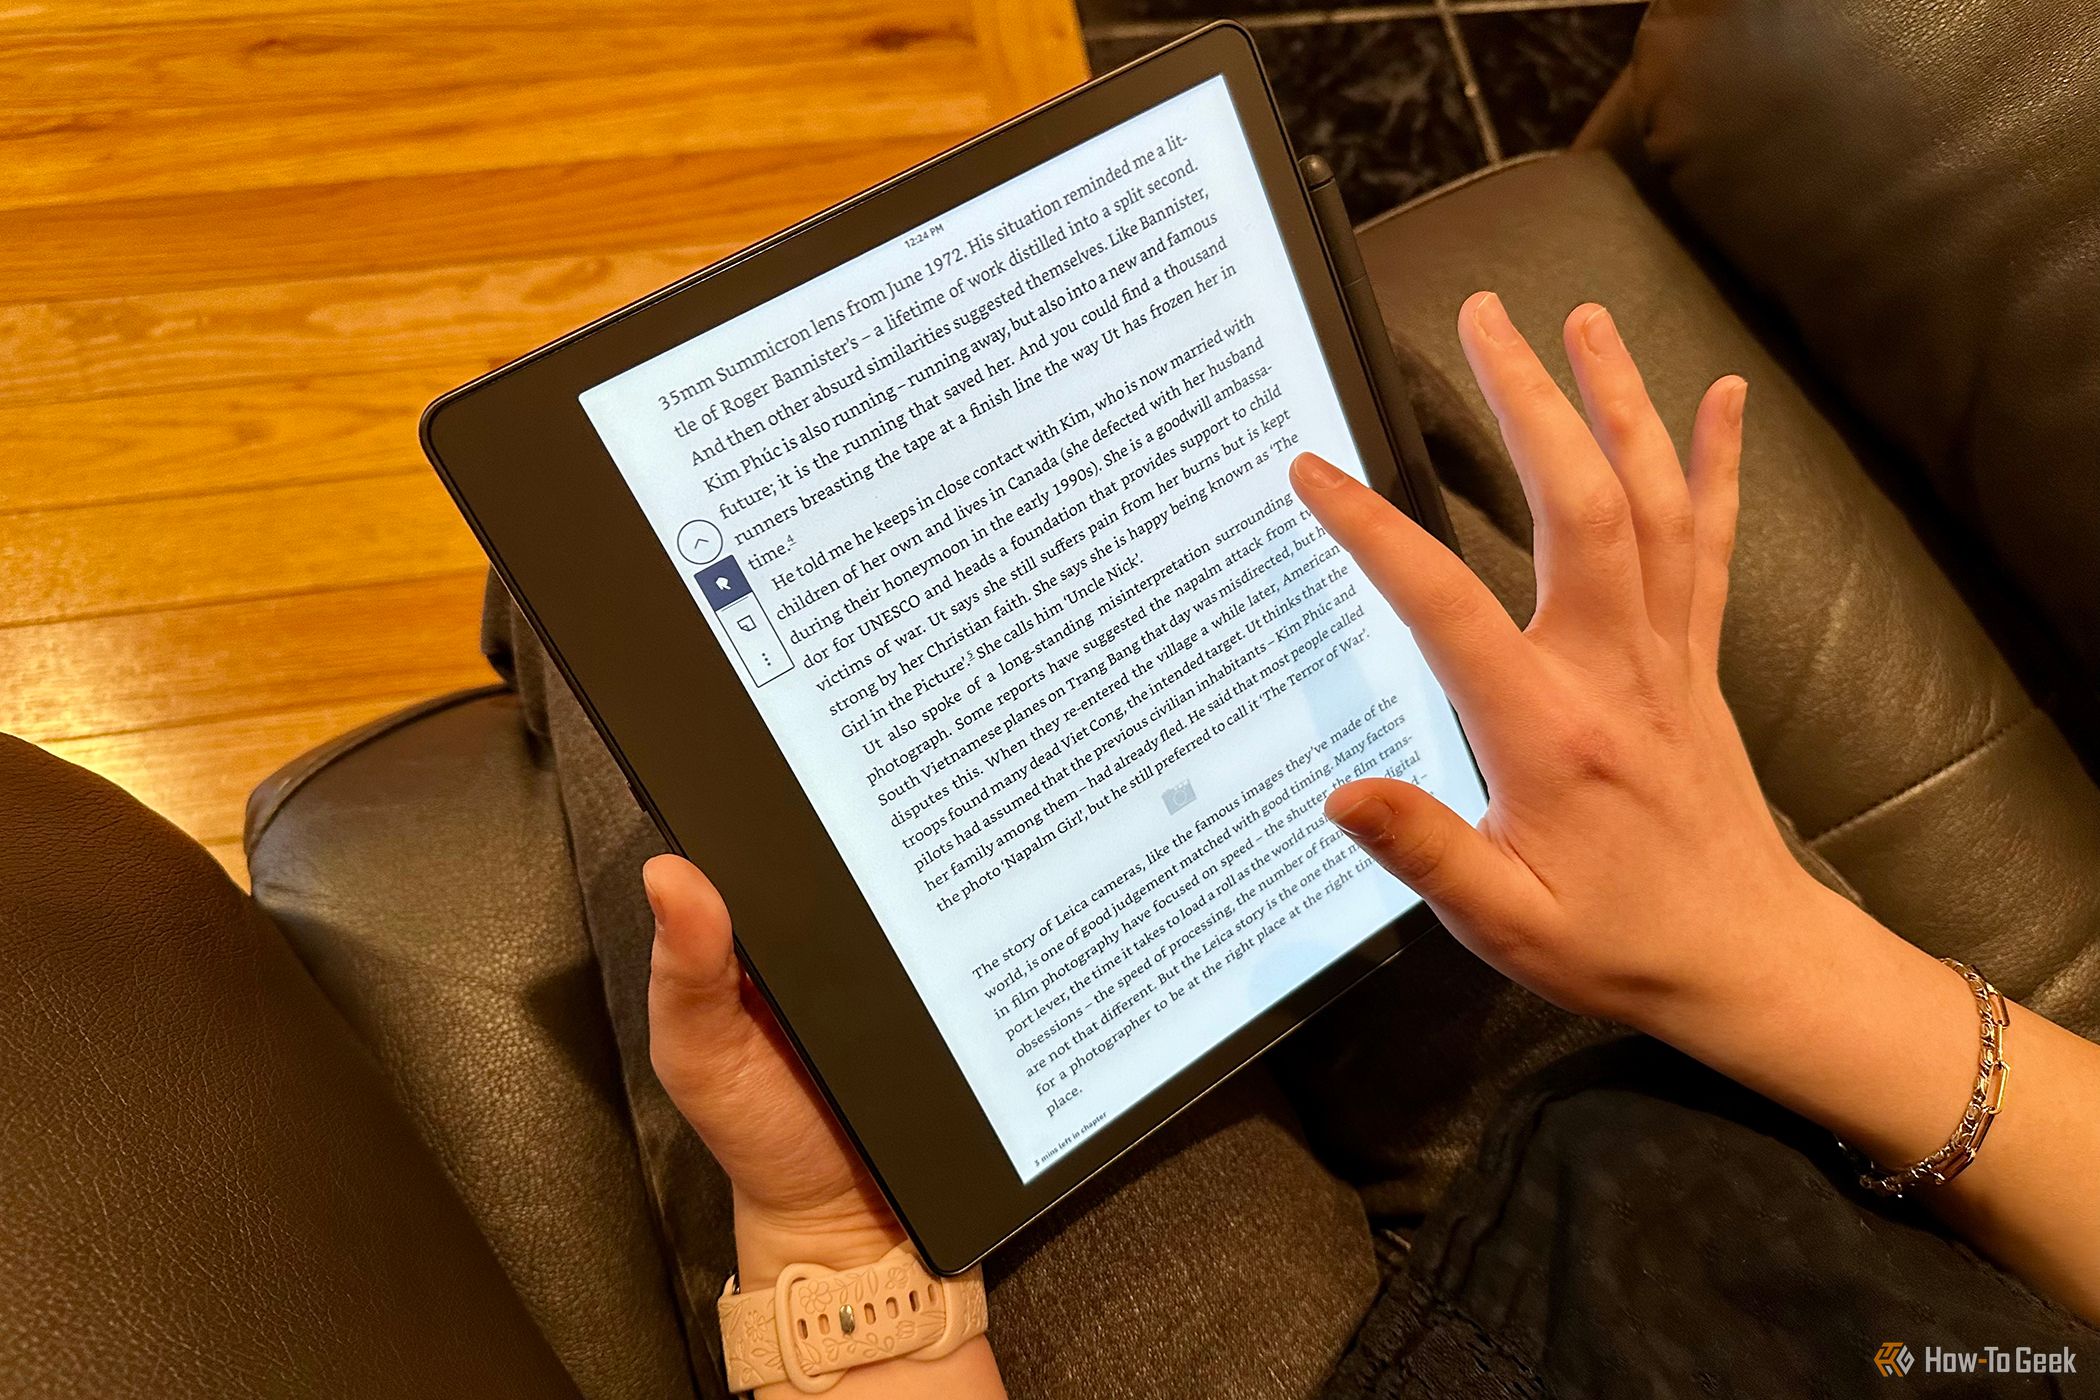 Kindle Scribe being used